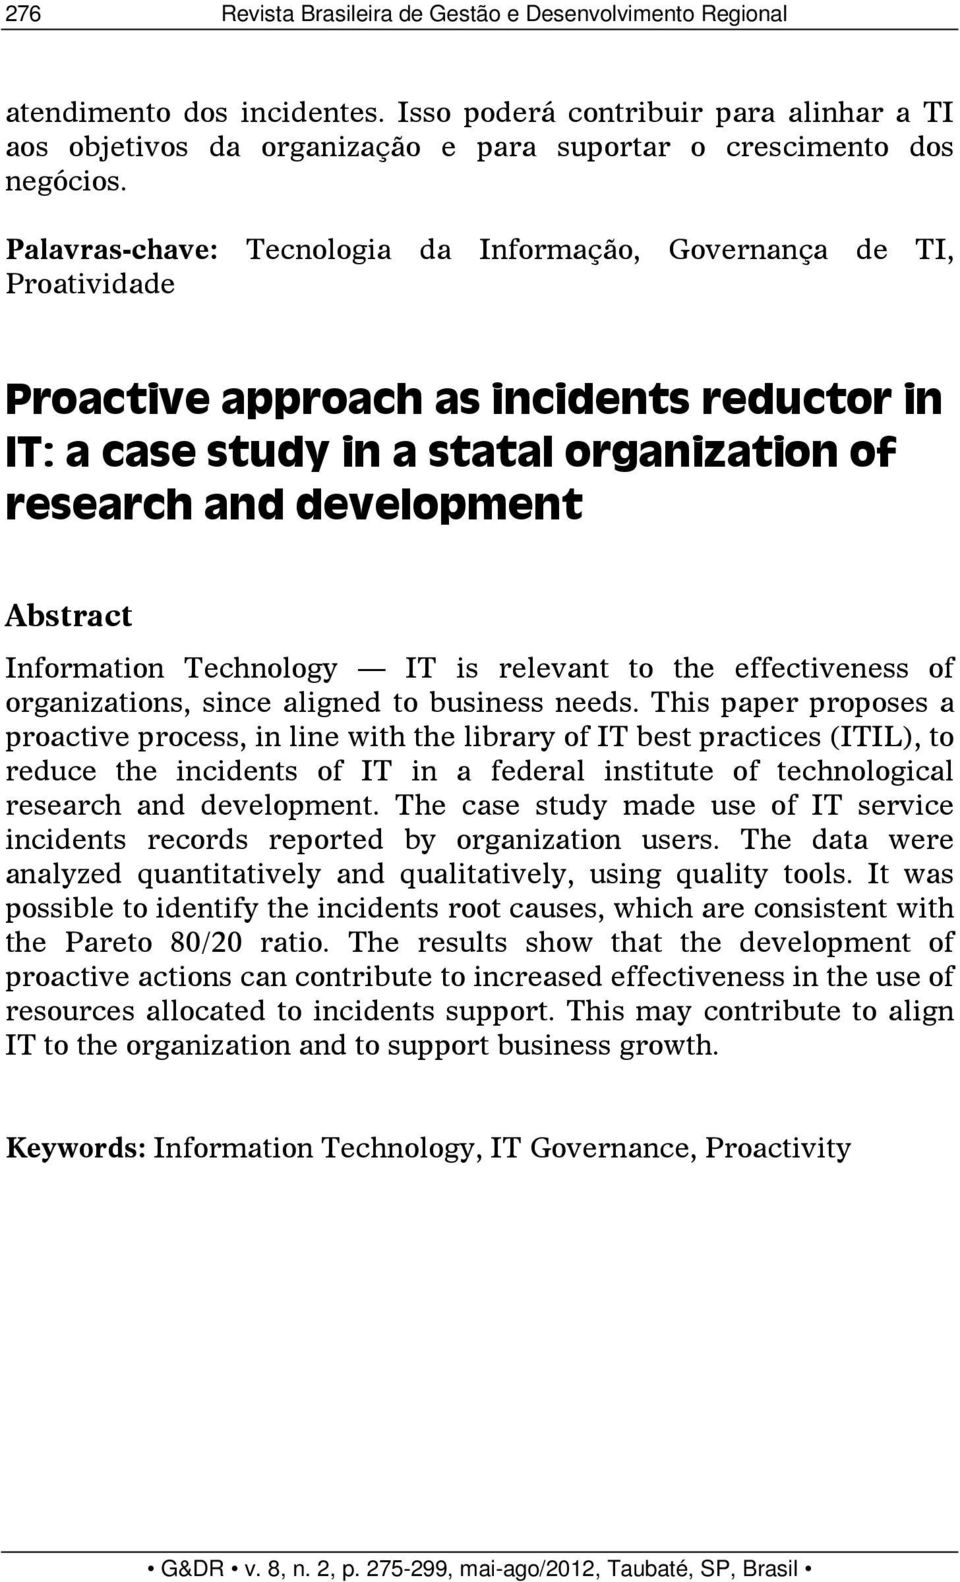 Palavras-chave: Tecnologia da Informação, Governança de TI, Proatividade Proactive approach as incidents reductor in IT: a case study in a statal organization of research and development Abstract